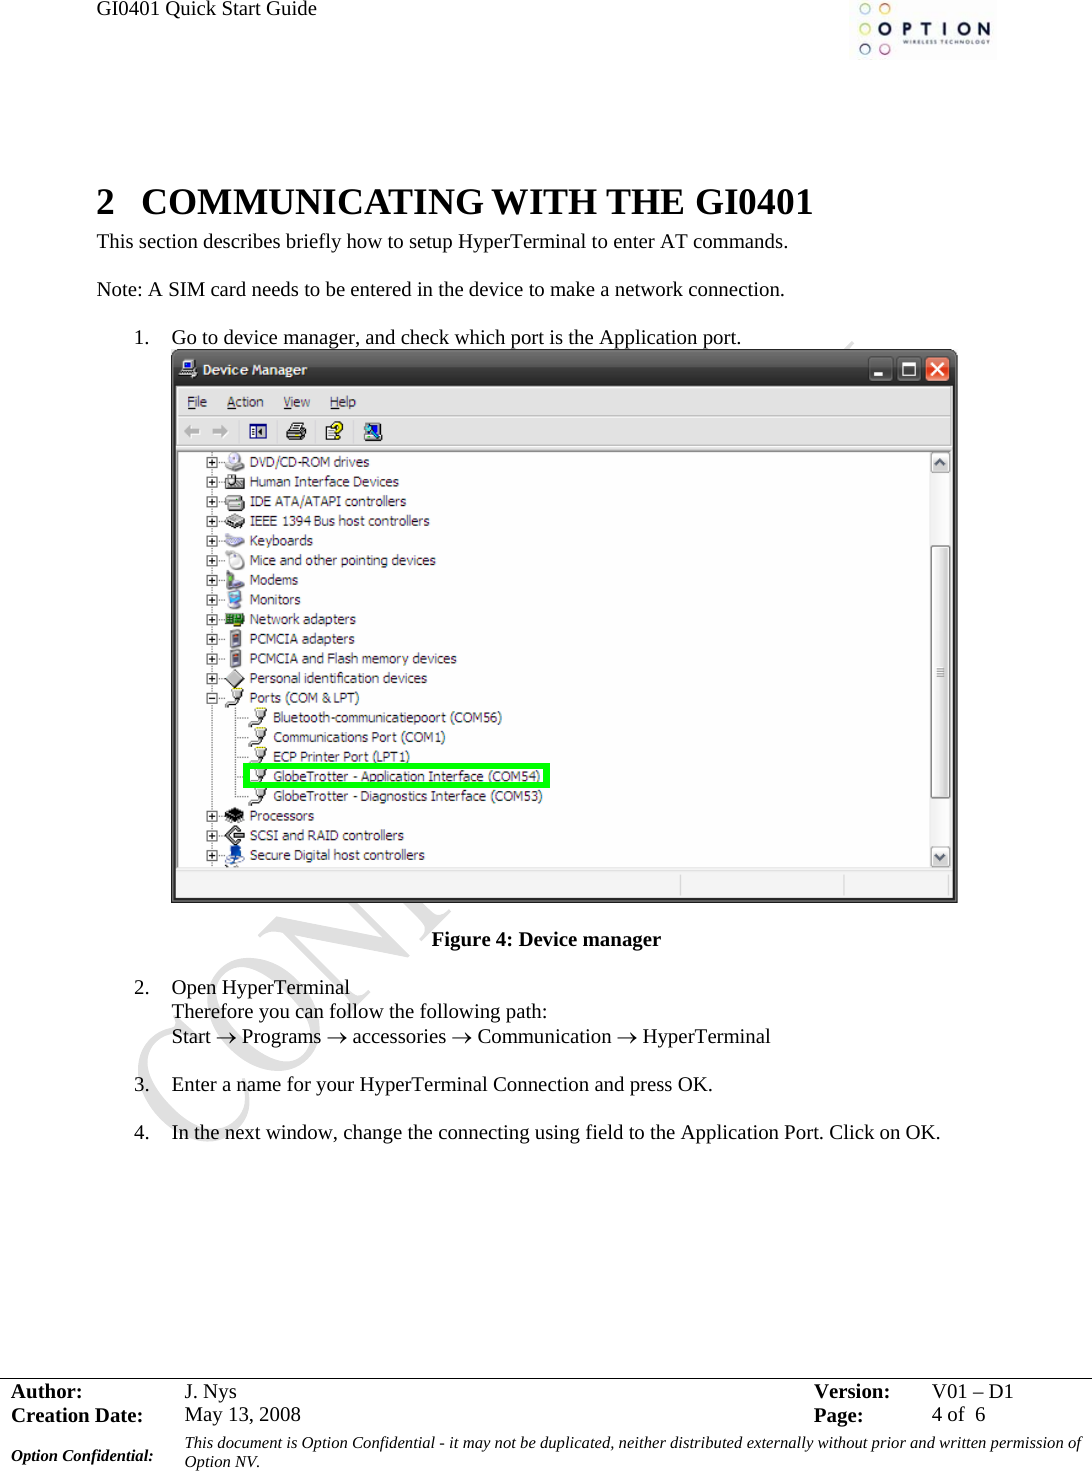 GI0401 Quick Start Guide     Author:  J. N  2 COMMUNICATING WITH THE GI0401 This section describes briefly how to setup HyperTerminal to enter AT commands.  Note: A SIM card needs to be entered in the device to make a network connection.  1. Go to device manager, and check which port is the Application port. ys  Version:  V01 –D1Creation Date:  May 13, 2008    Page:  4 of  6 Option Confidential:  This document is Option Confidential - it may not be duplicated, neither distributed externally without prior and written permission of Option NV.      Figure 4: Device manager  2. Open HyperTerminal Therefore you can follow the following path: Start → Programs → accessories → Communication → HyperTerminal  3. Enter a name for your HyperTerminal Connection and press OK.  4. In the next window, change the connecting using field to the Application Port. Click on OK.  